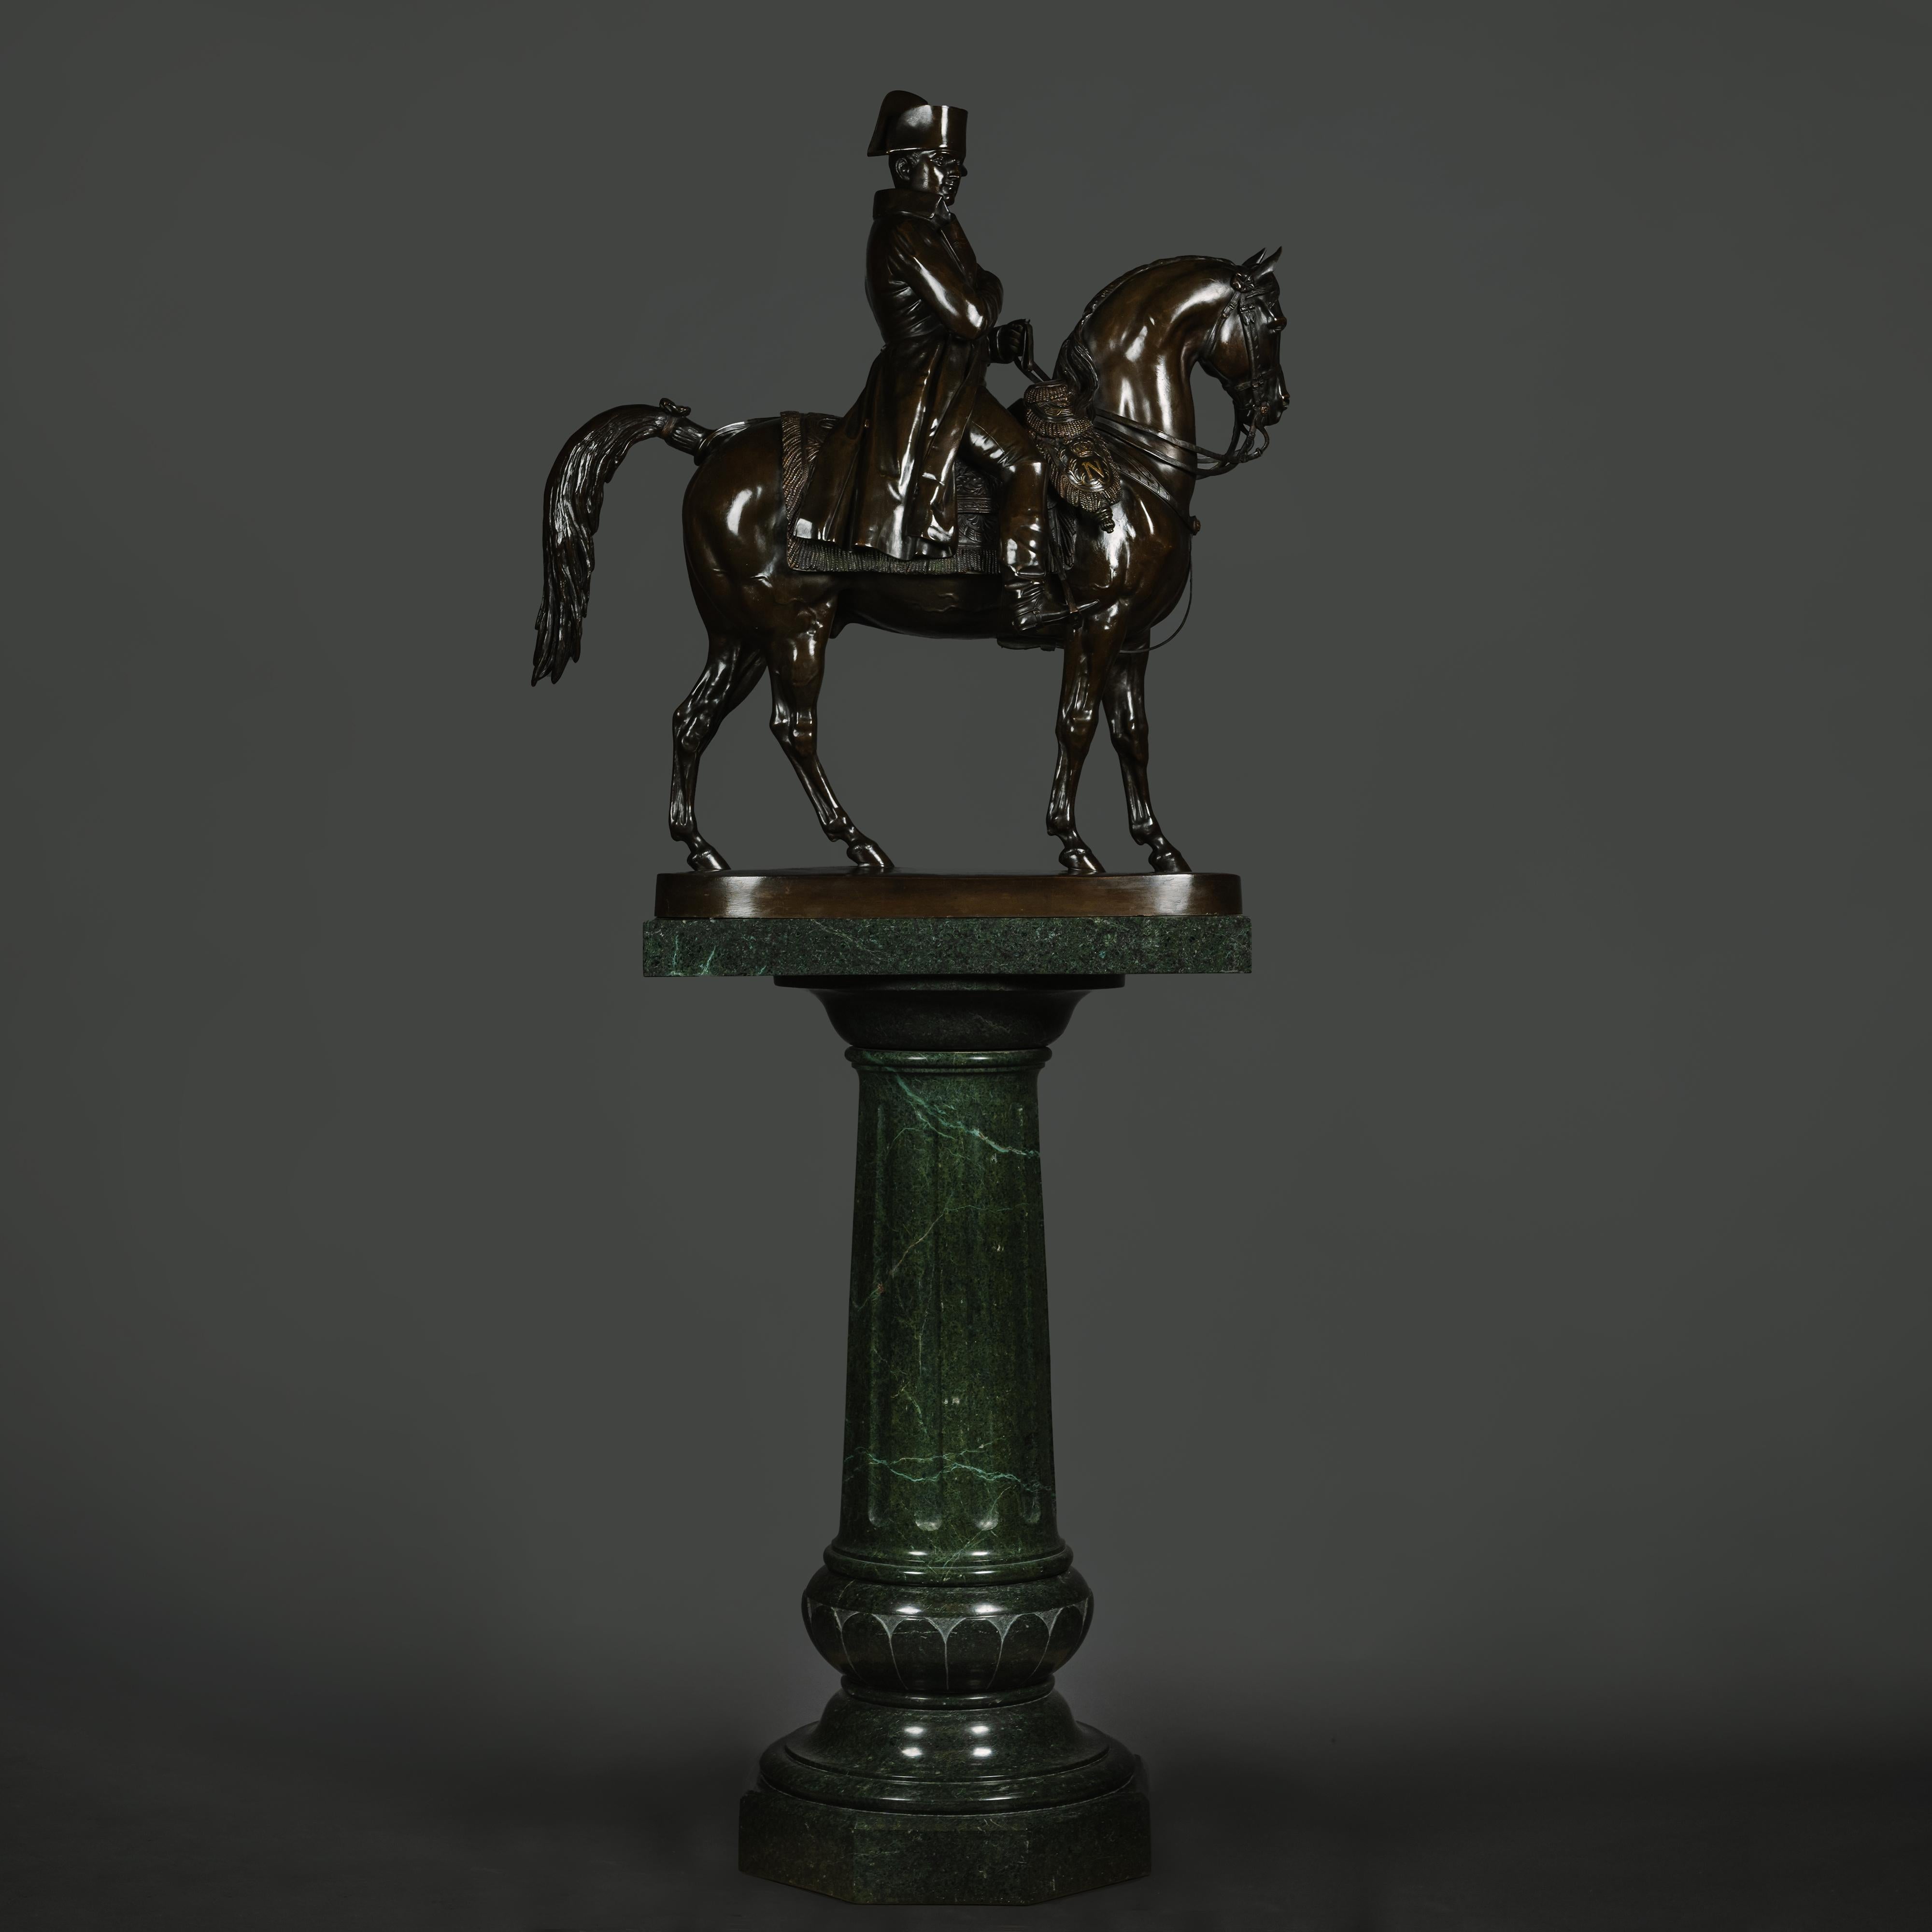 A Large Patinated Bronze Sculpture of Emperor Napoleon on Horseback, Cast by Susse Frères, Paris, From the Model By Alfred Émilien O'Hara, Comte de Nieuwerkerke (1811-1892).

Dark brown patinated bronze.  

Depicting the Emperor Napoleon on